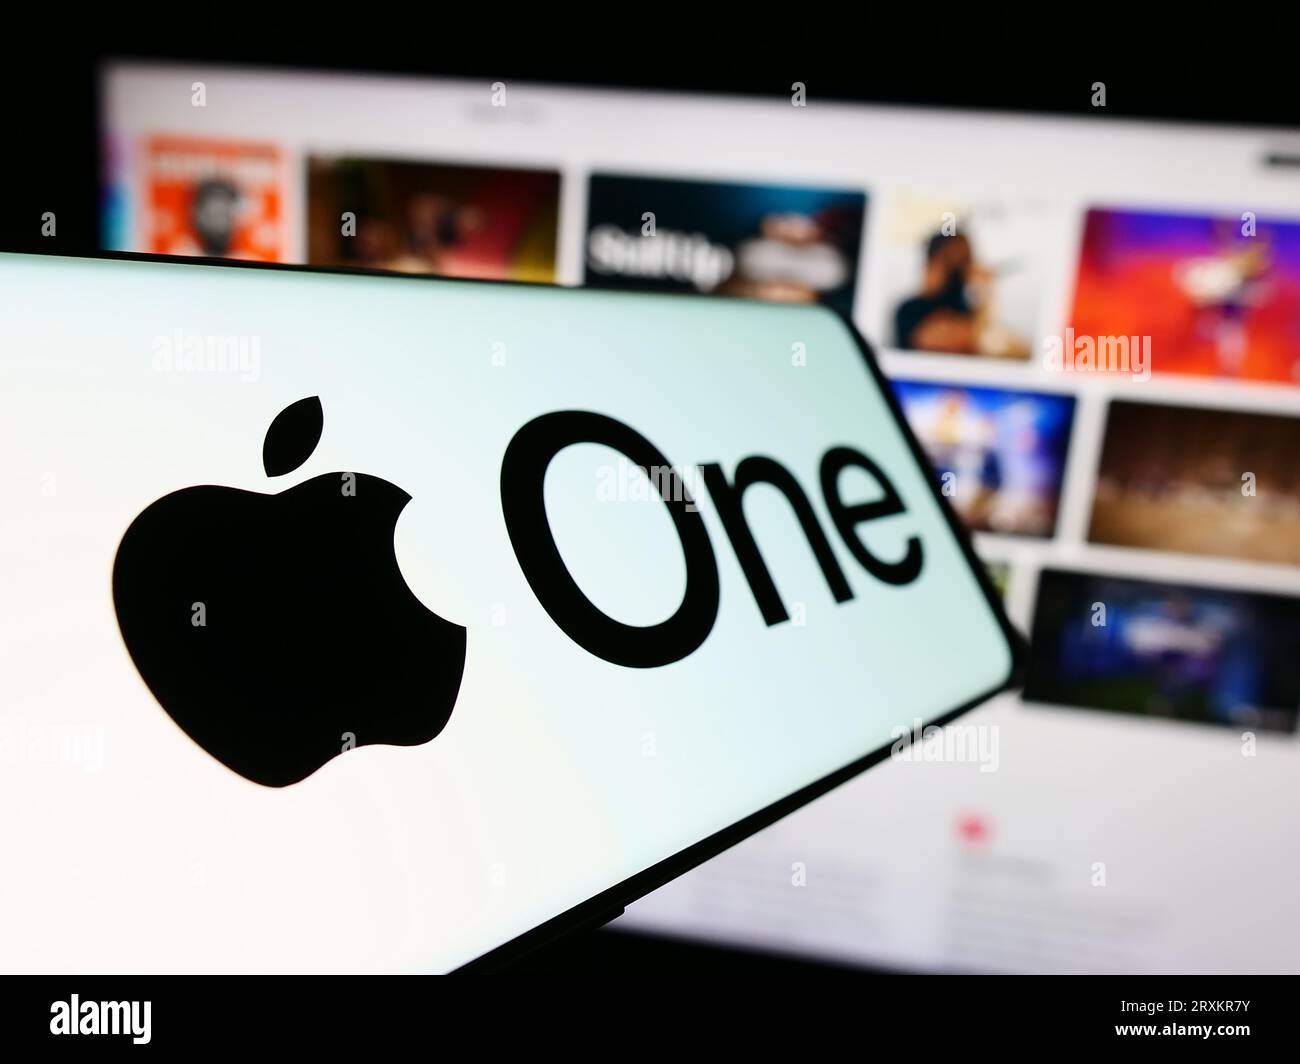 Cellphone with logo of subscription service Apple One on screen in front of business website. Focus on center-left of phone display. Stock Photo